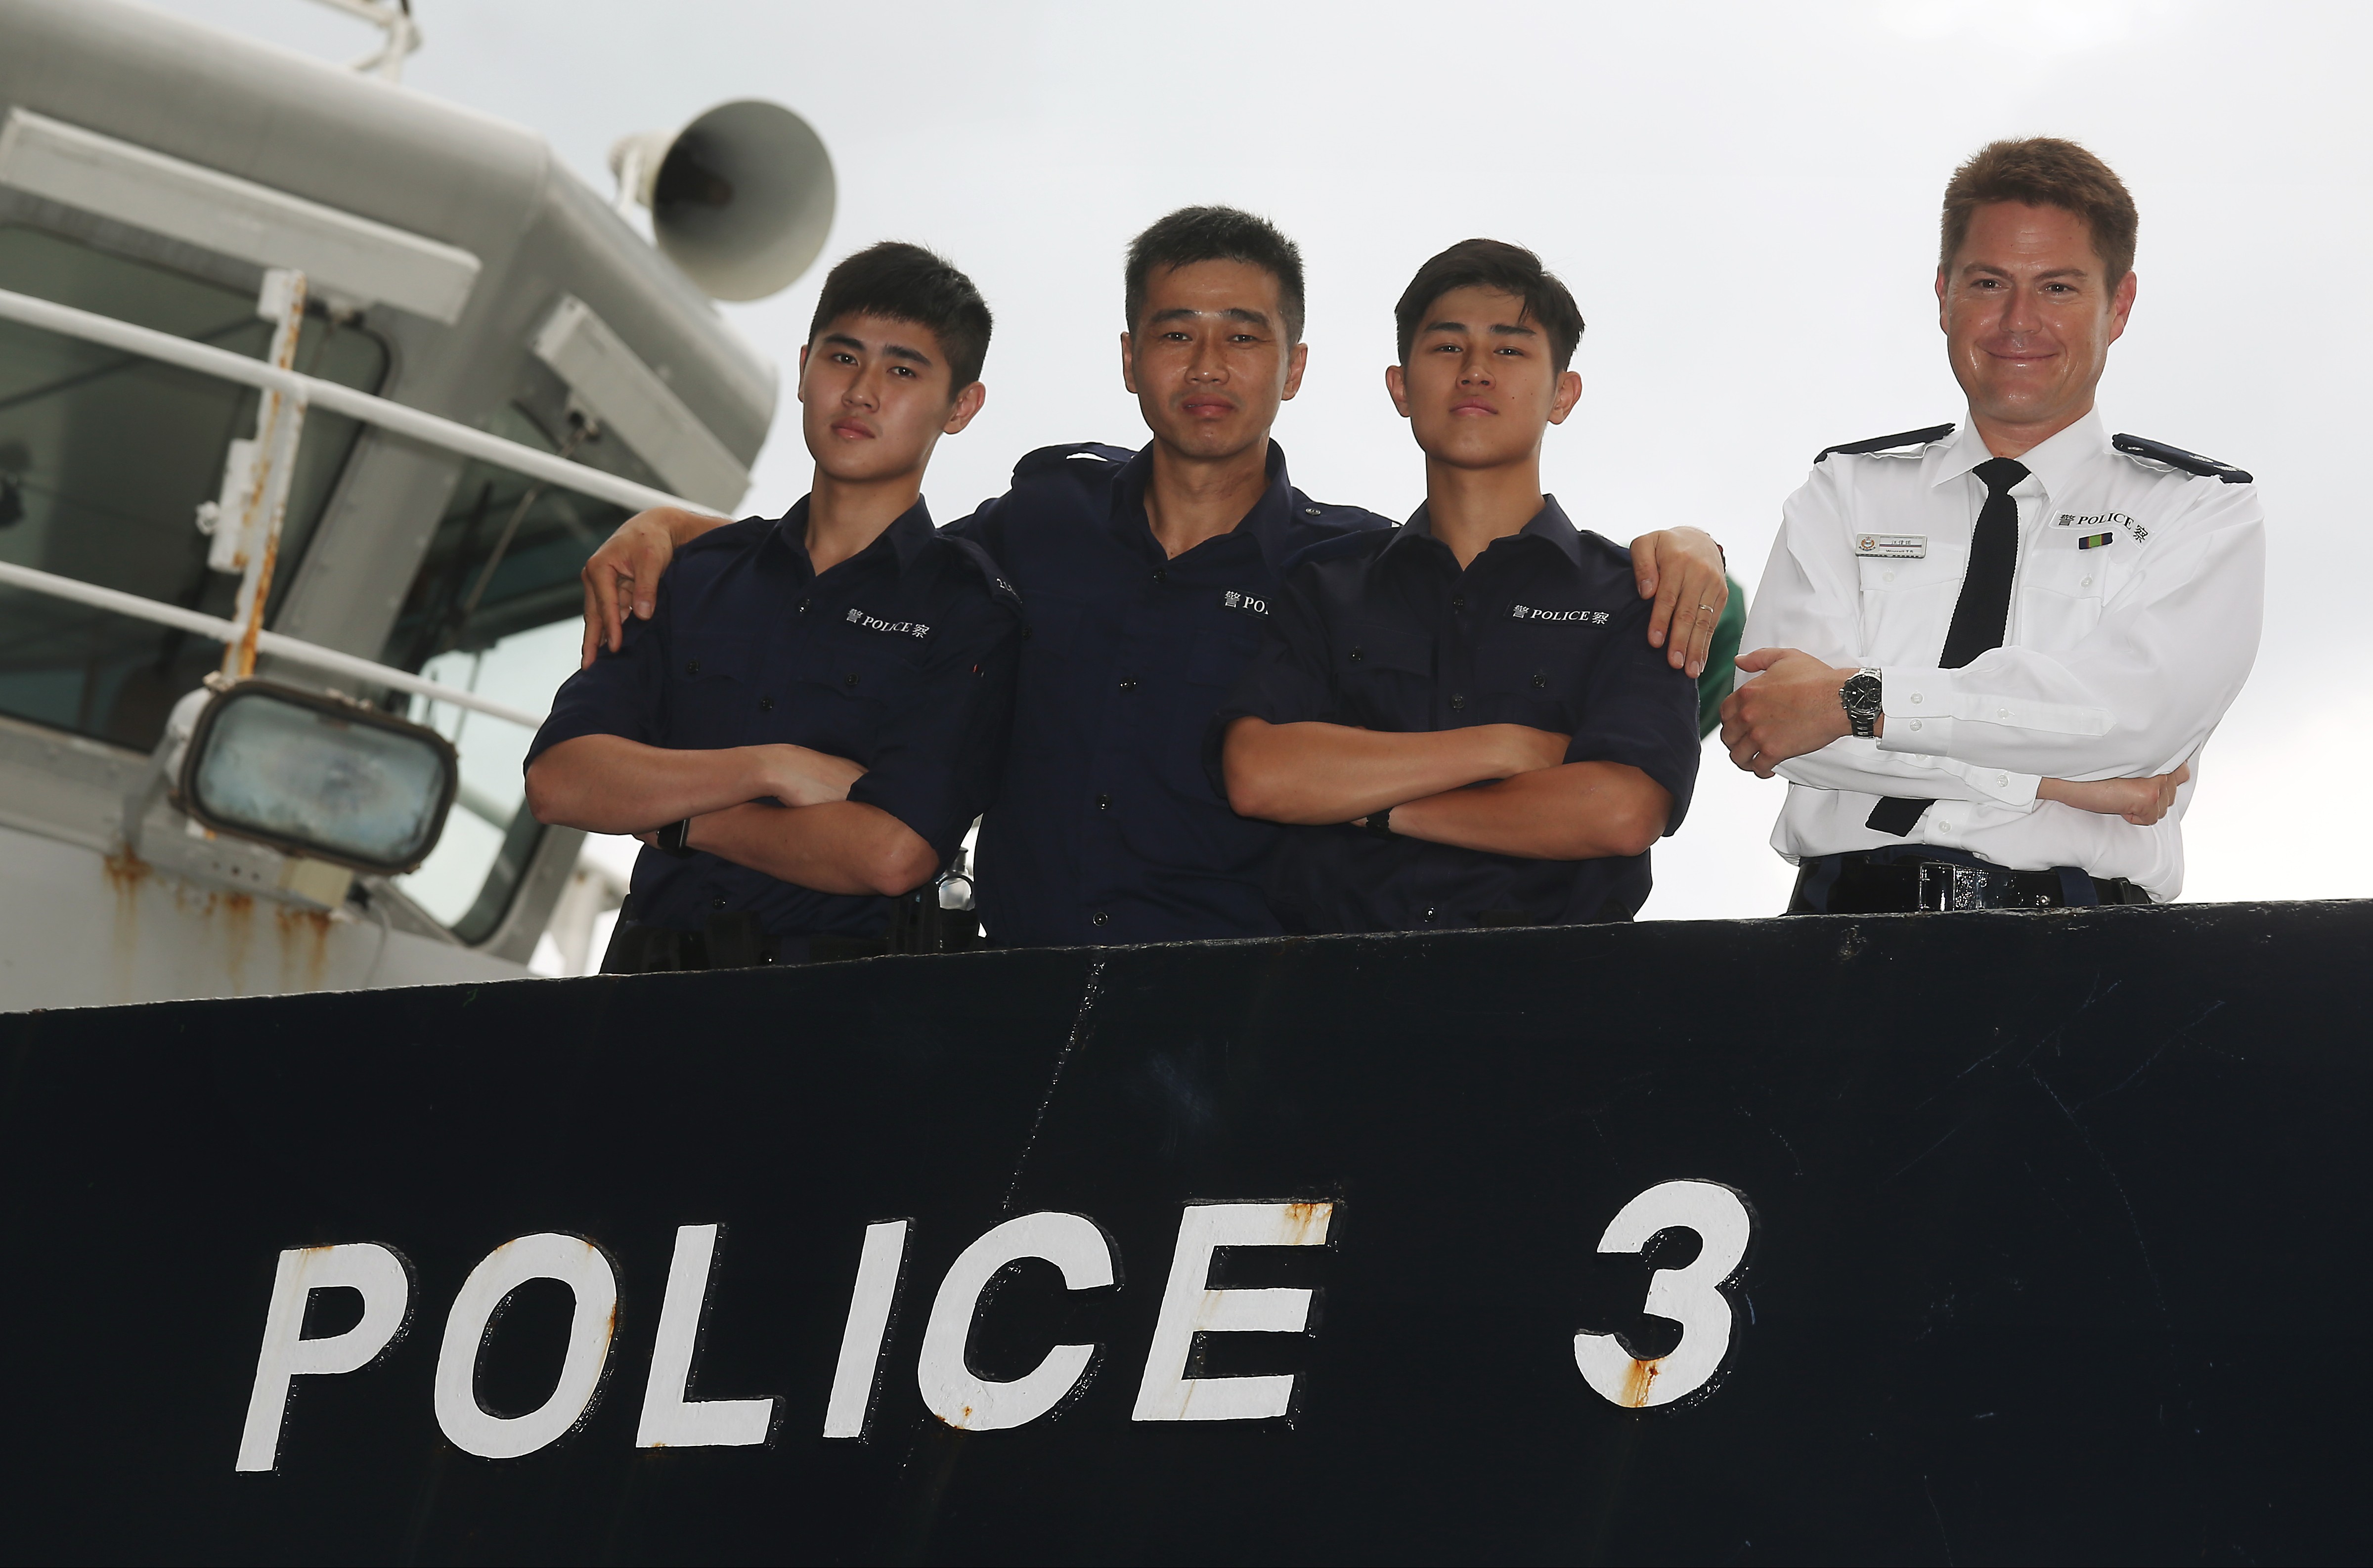 Marine police officers Lam Ho-long (left), father Lan Cheuk-lun, Lam Ho-chun and Tim Worrall (right) on a boat at headquarters in Sai Wan Ho. Photo: K. Y. Cheng